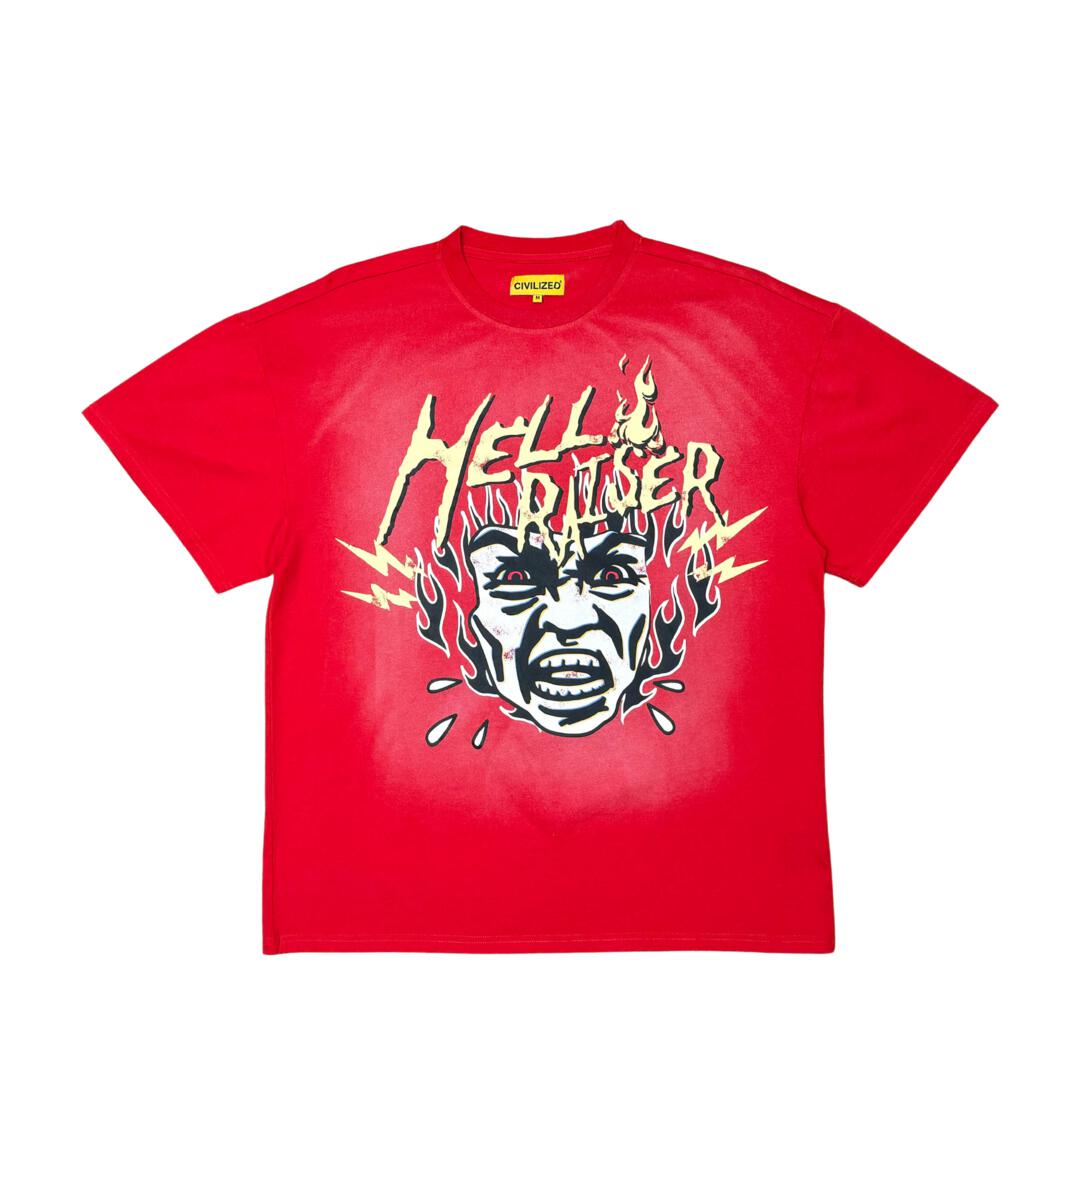 CIVILIZED HELL Raiser Records Vintage Red Tee